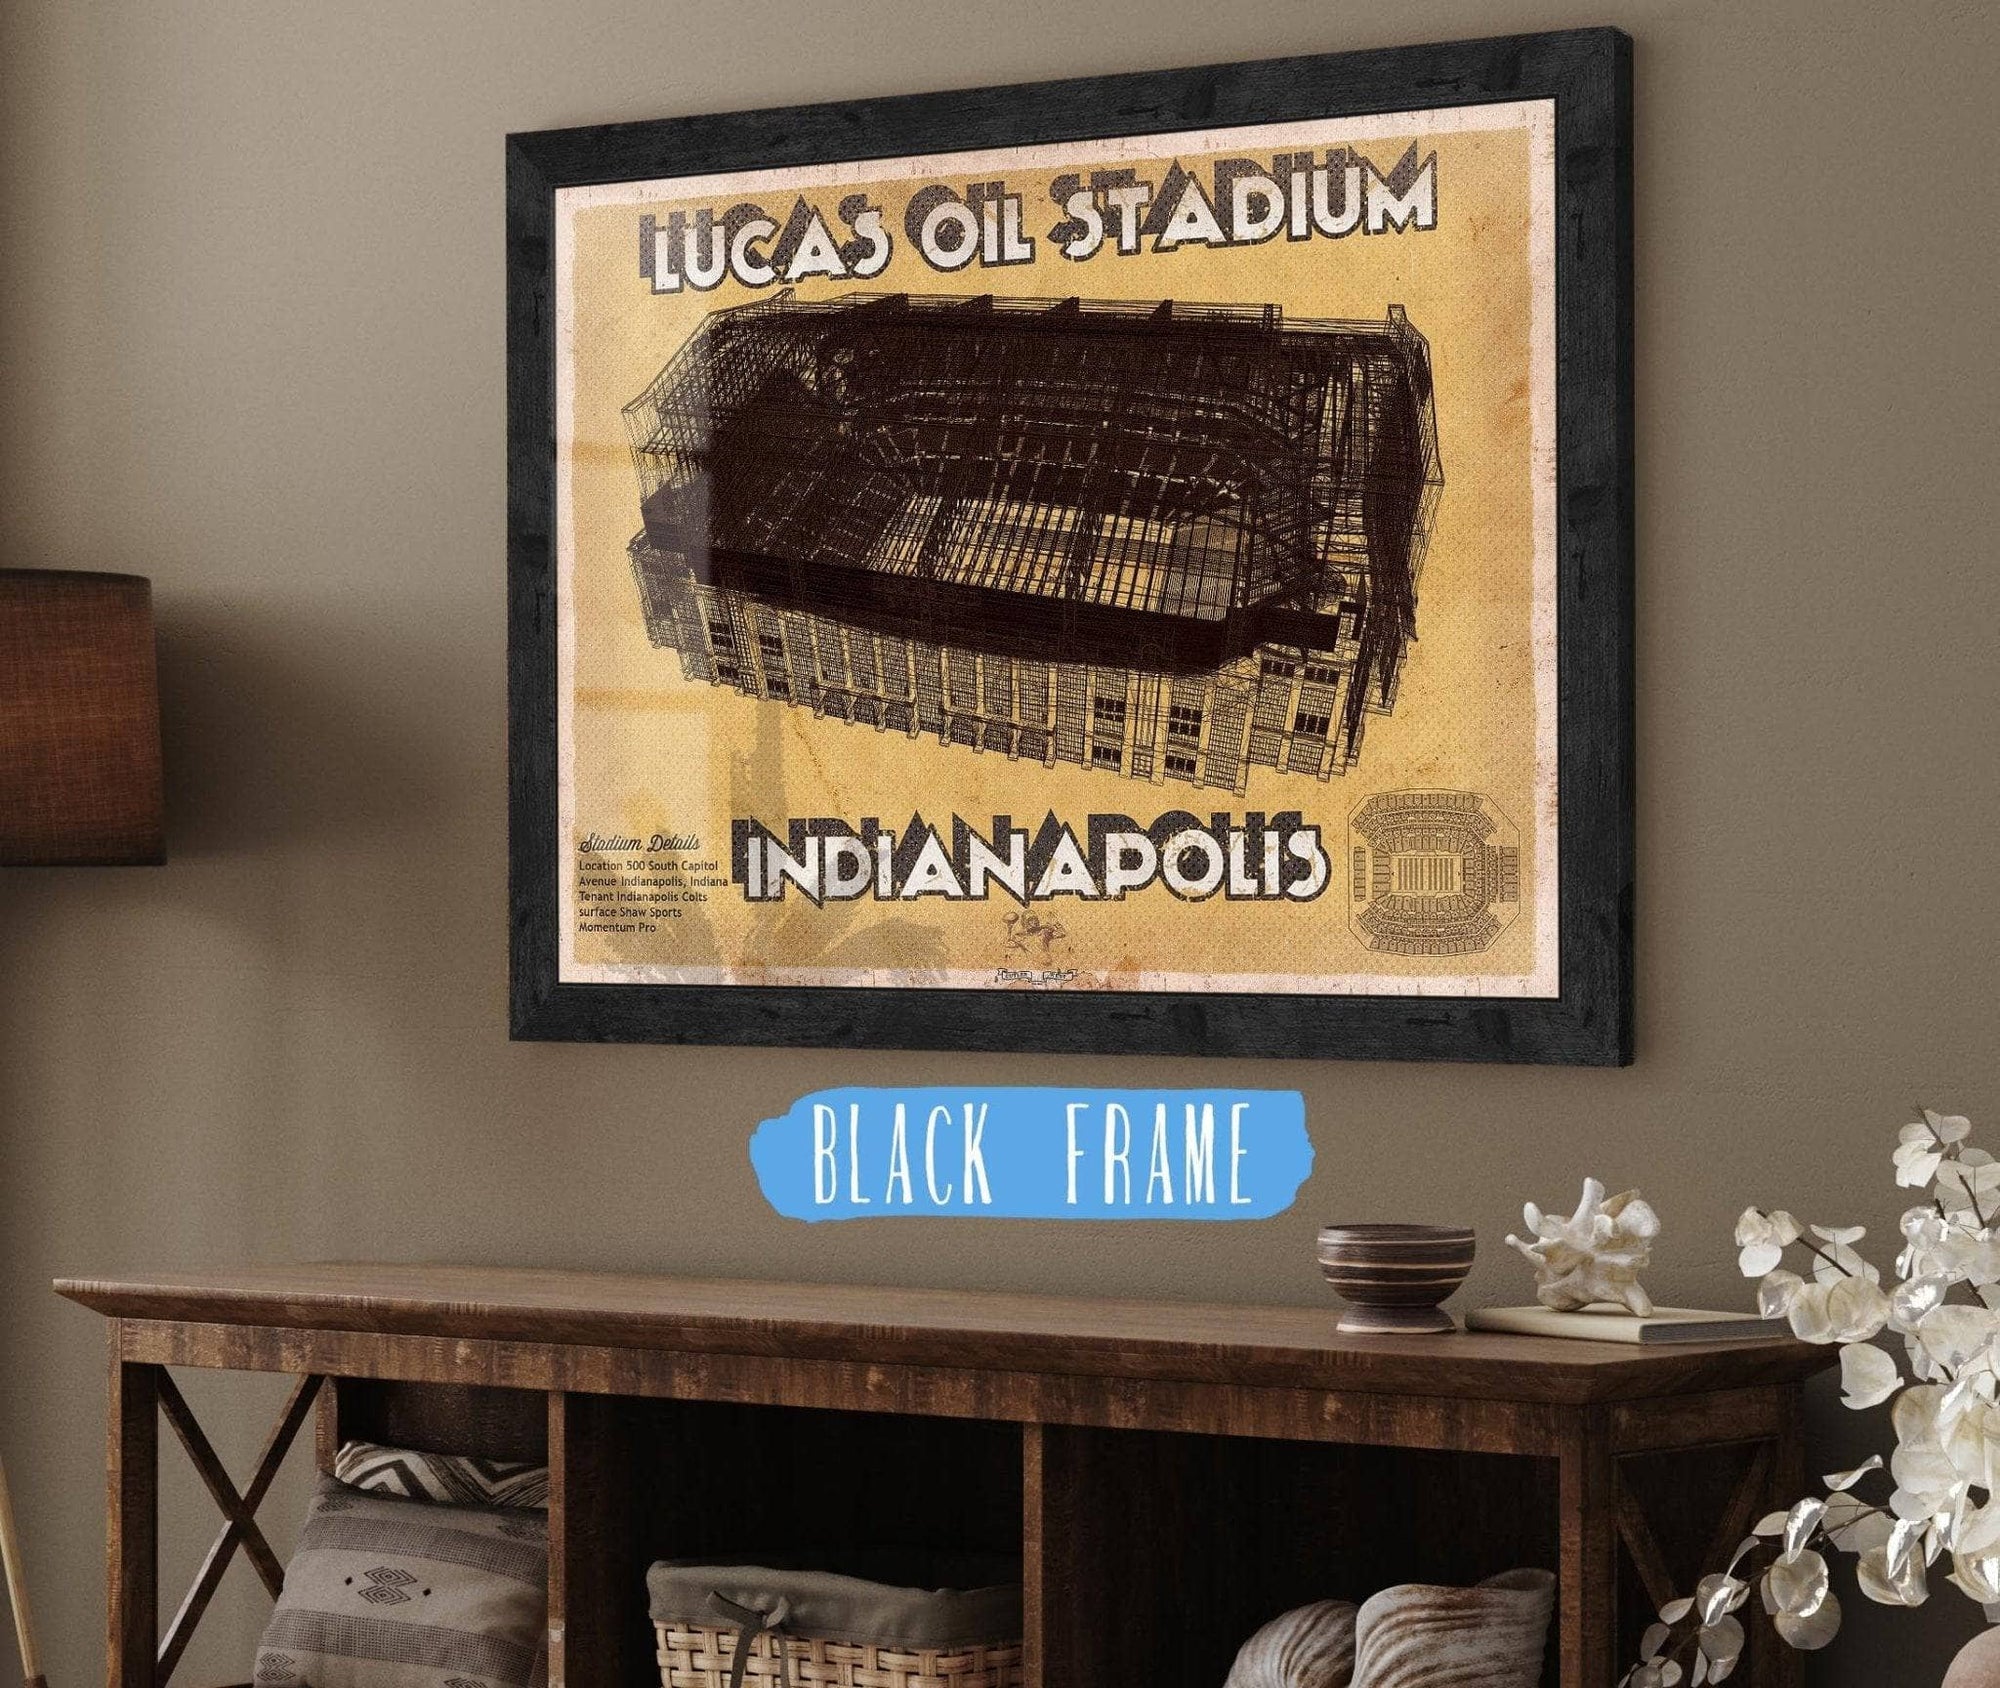 Cutler West Pro Football Collection 14" x 11" / Black Frame Indianapolis Colts Lucas Oil Stadium Vintage Football Print 700666450_64973